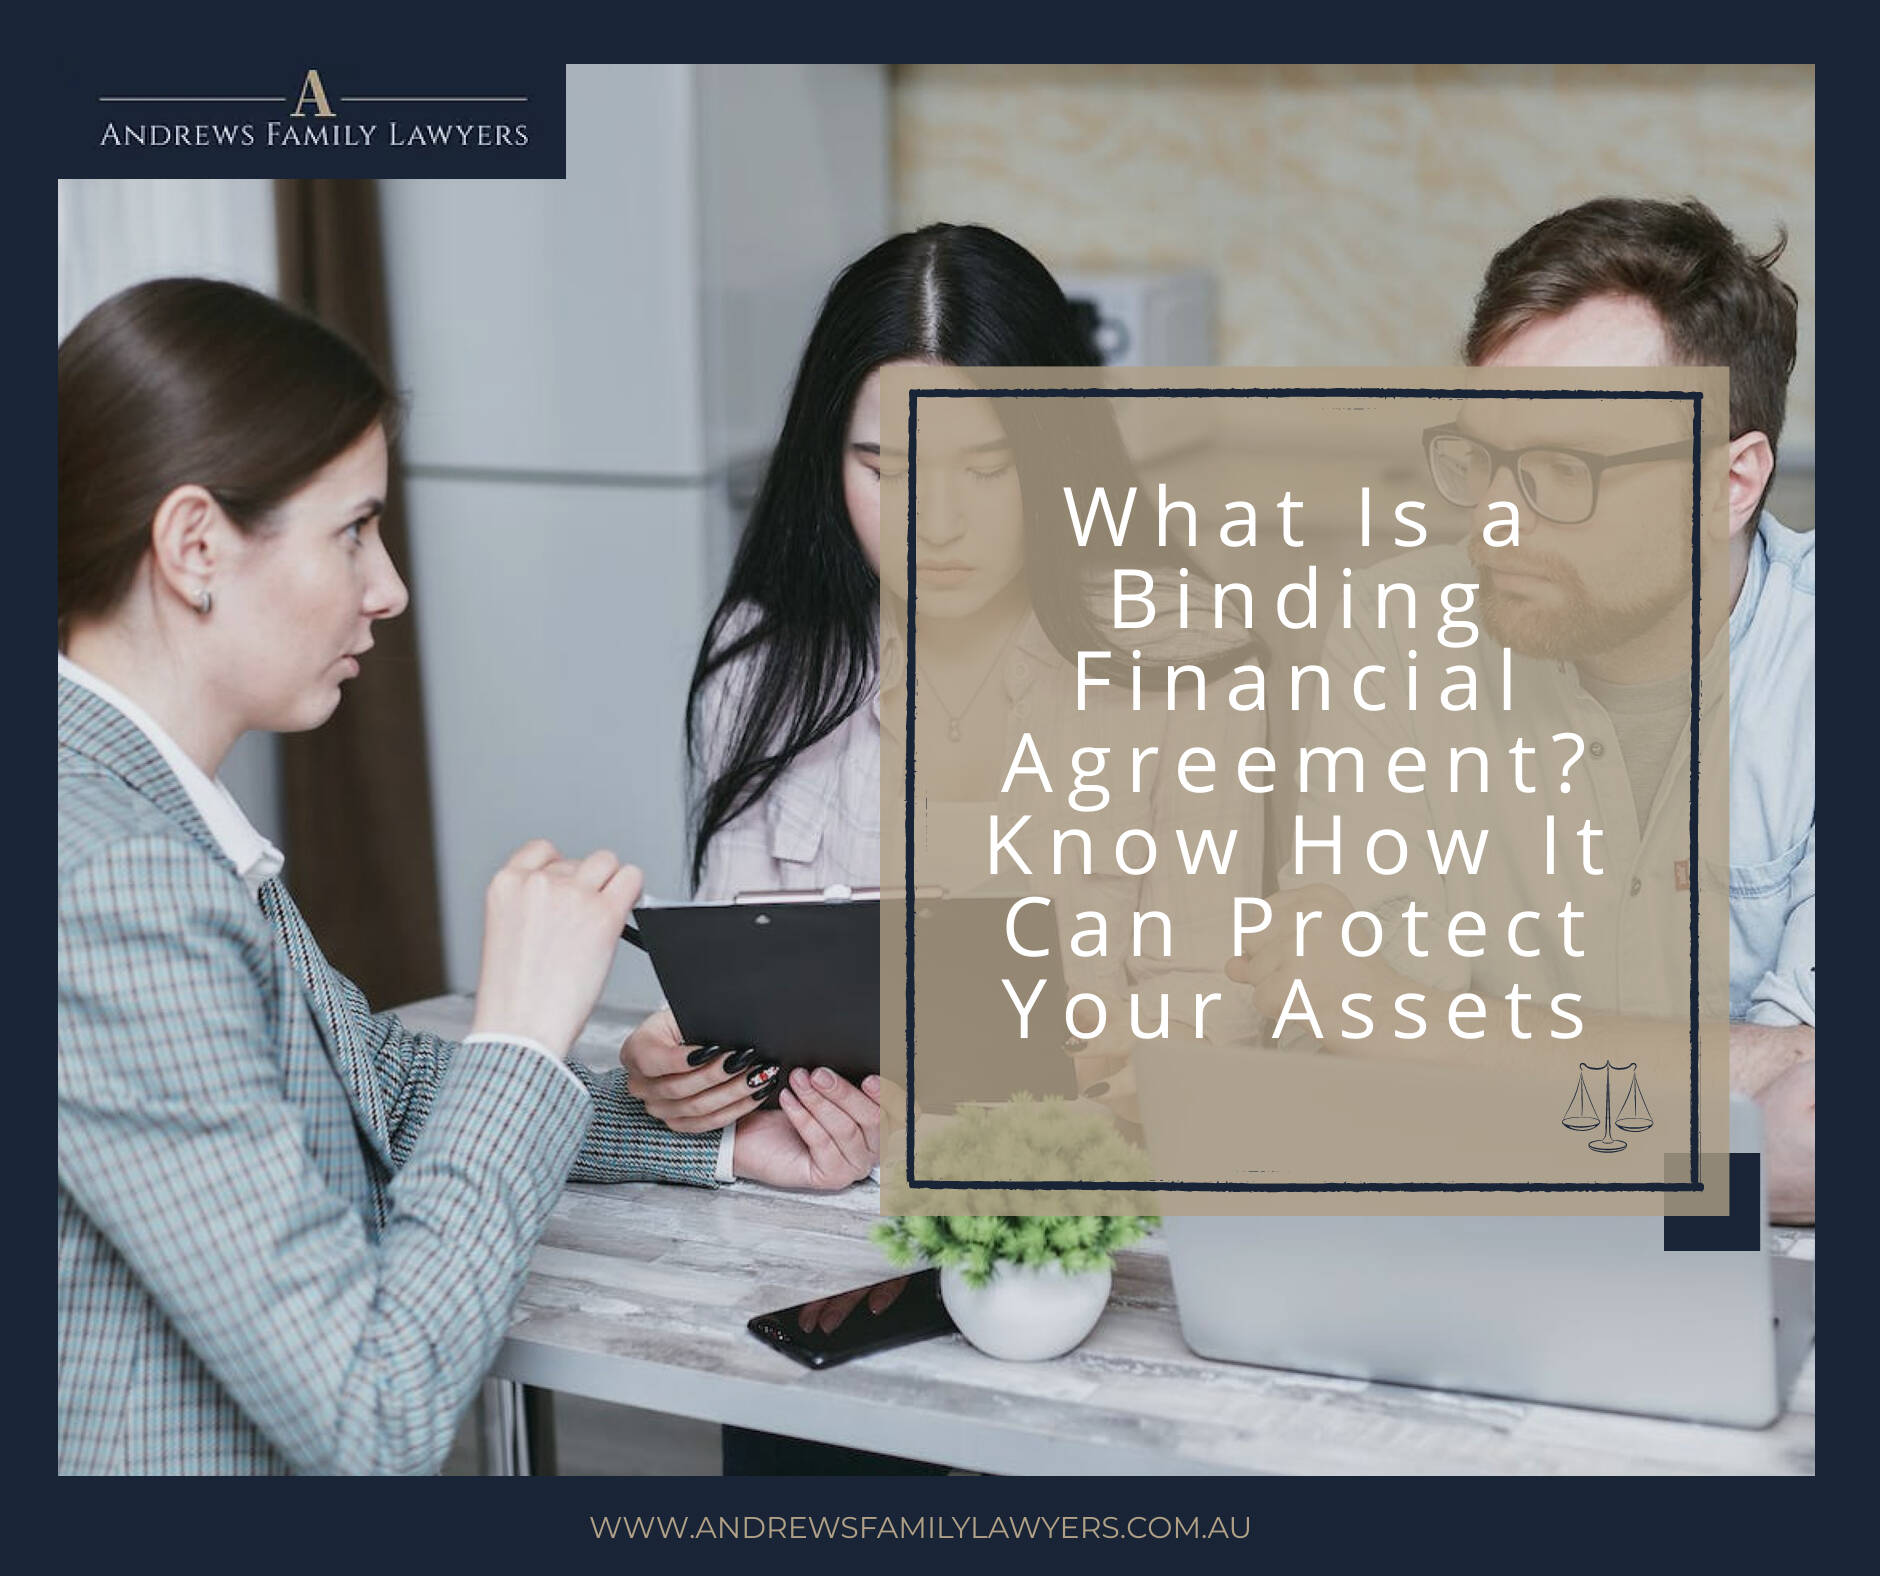 What Is a Binding Financial Agreement? Know How It Can Protect Your Assets